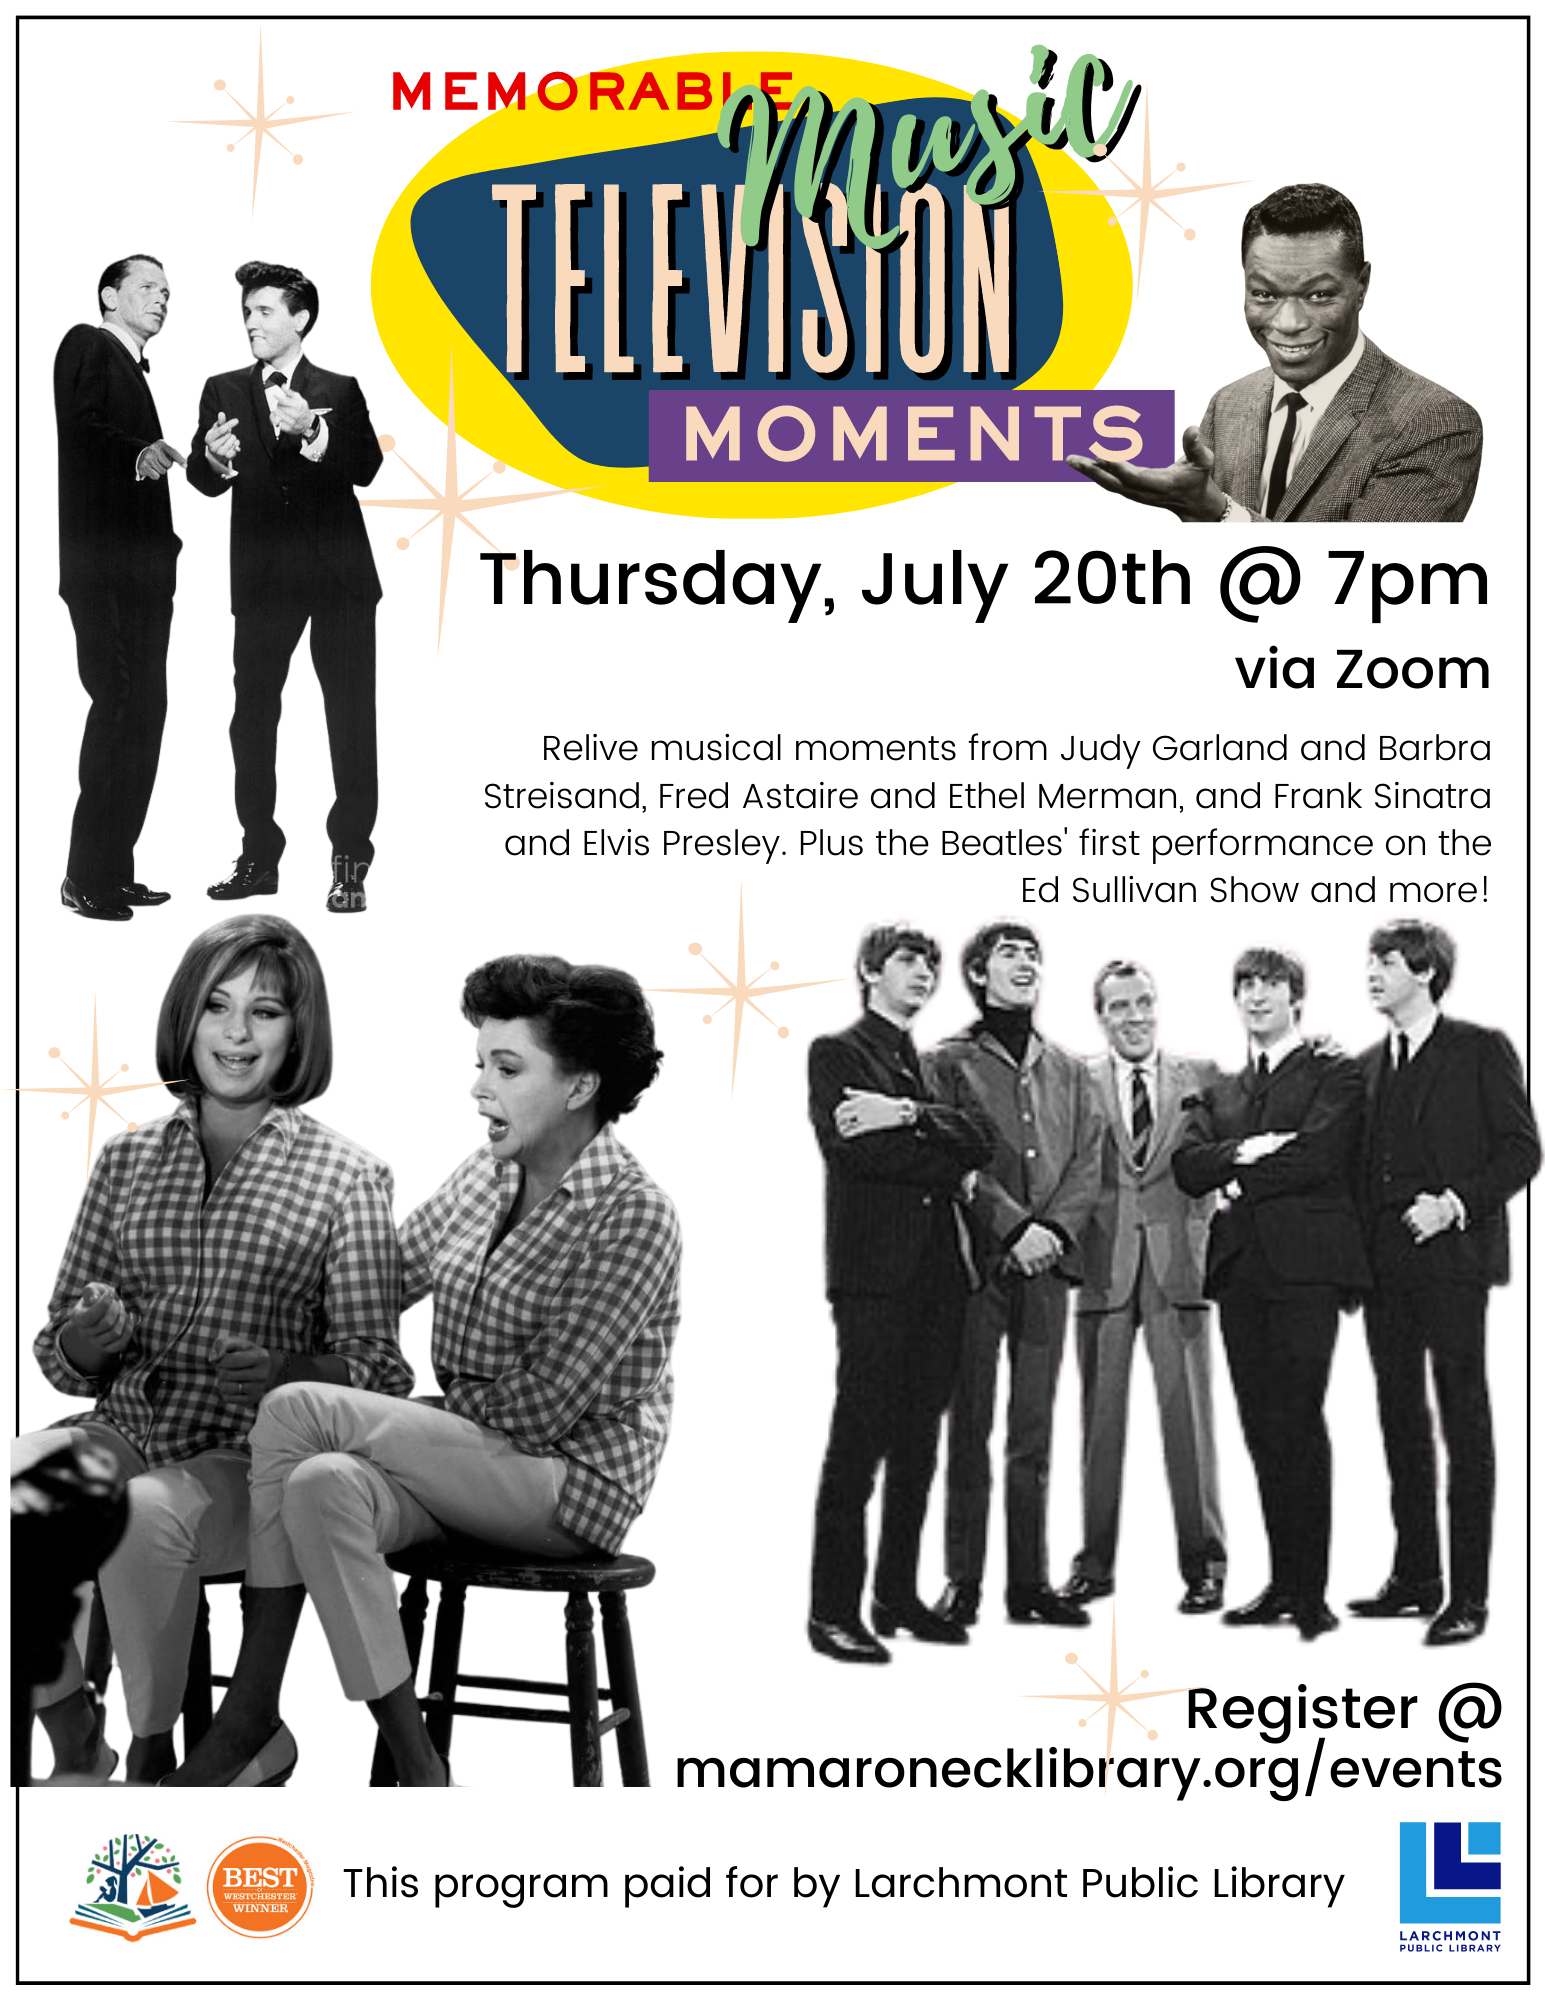 via Zoom: 7/20 @ 7pm. memorable music moments from television, 2 7pm.